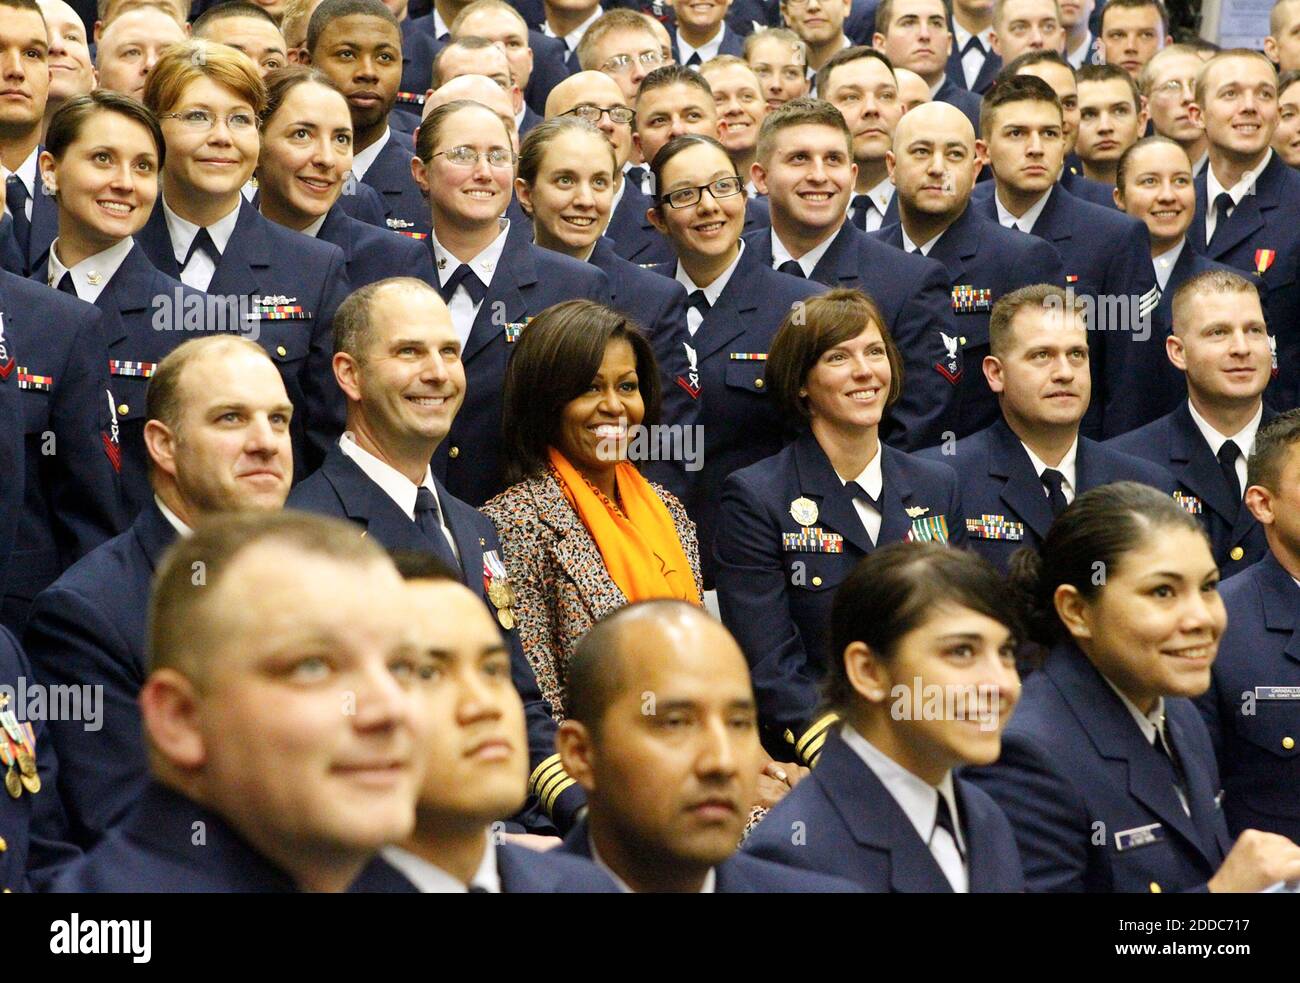 NO FILM, NO VIDEO, NO TV, NO DOCUMENTARY - First lady Michelle Obama, left center, poses for a photo with the crew of the Coast Guard Cutter Stratton during a tour of the ship on Coast Guard Island in Alameda, CA, USA ON March 31, 2012. The first lady made the trip to California to join in the commissioning ceremony placing the ship into active service. Mrs. Obama, a sponsor of the Cutter Stratton, helped christen the ship in Pascagoula, Mississippi, in 2010 by breaking a champagne bottle over the bow. Photo by Anda Chu/Oakland Tribune/MCT/ABACAPRESS.COM Stock Photo